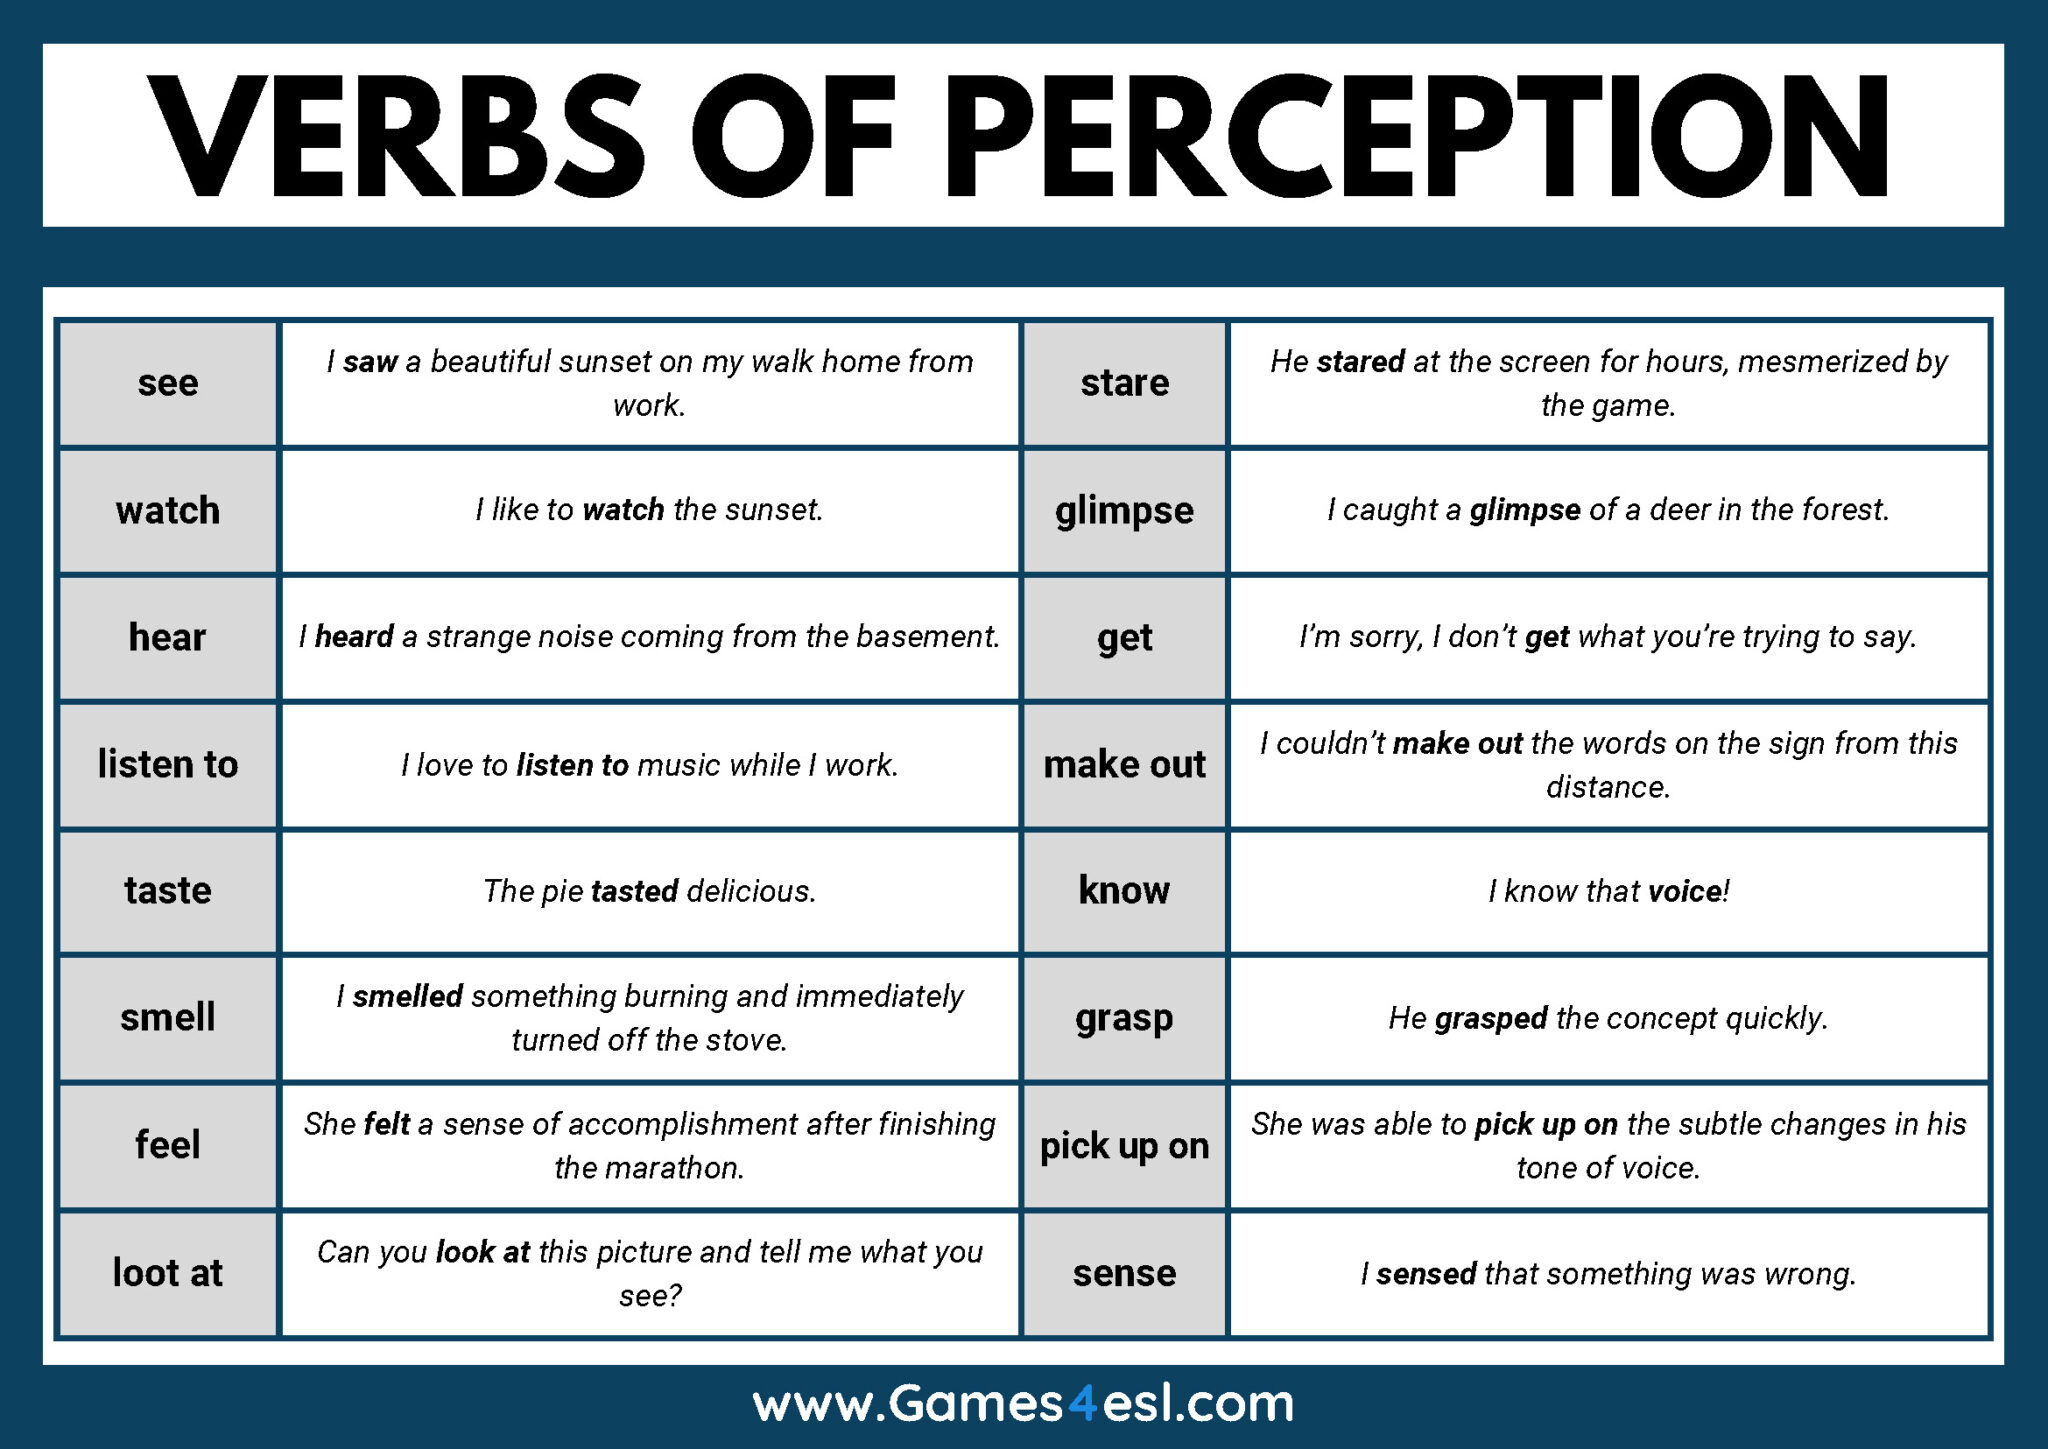 verbs-of-perception-useful-list-with-example-sentences-games4esl